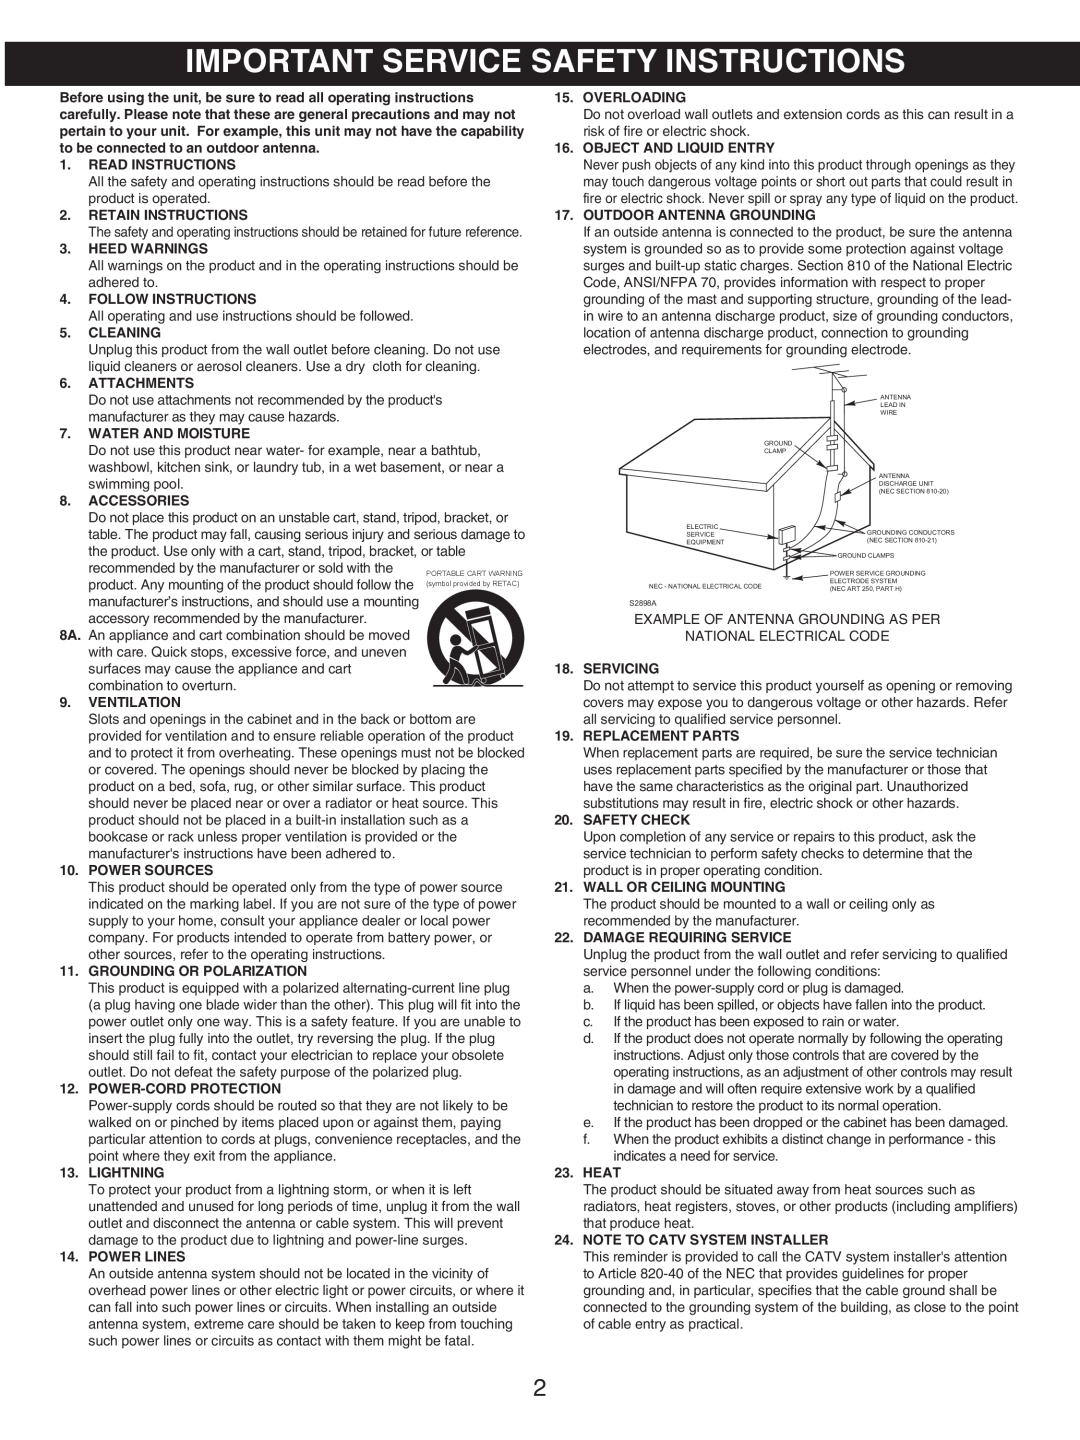 Memorex MX4107 manual Important Service Safety Instructions 